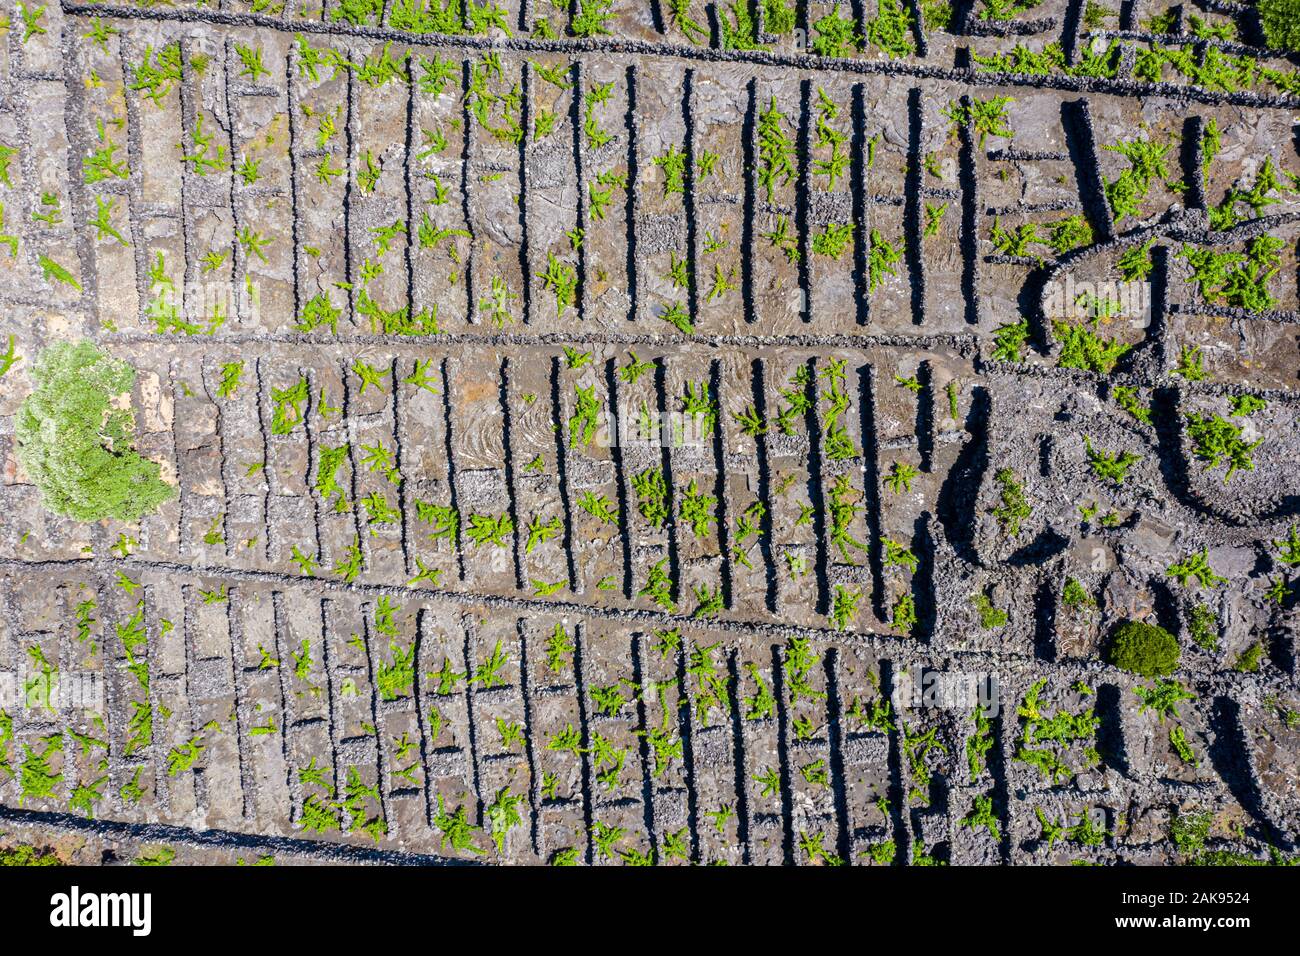 Top aerial view of man-made landscape of the Pico Island Vineyard Culture, Azores, Portugal. Regular pattern of spaced-out, long linear walls running Stock Photo